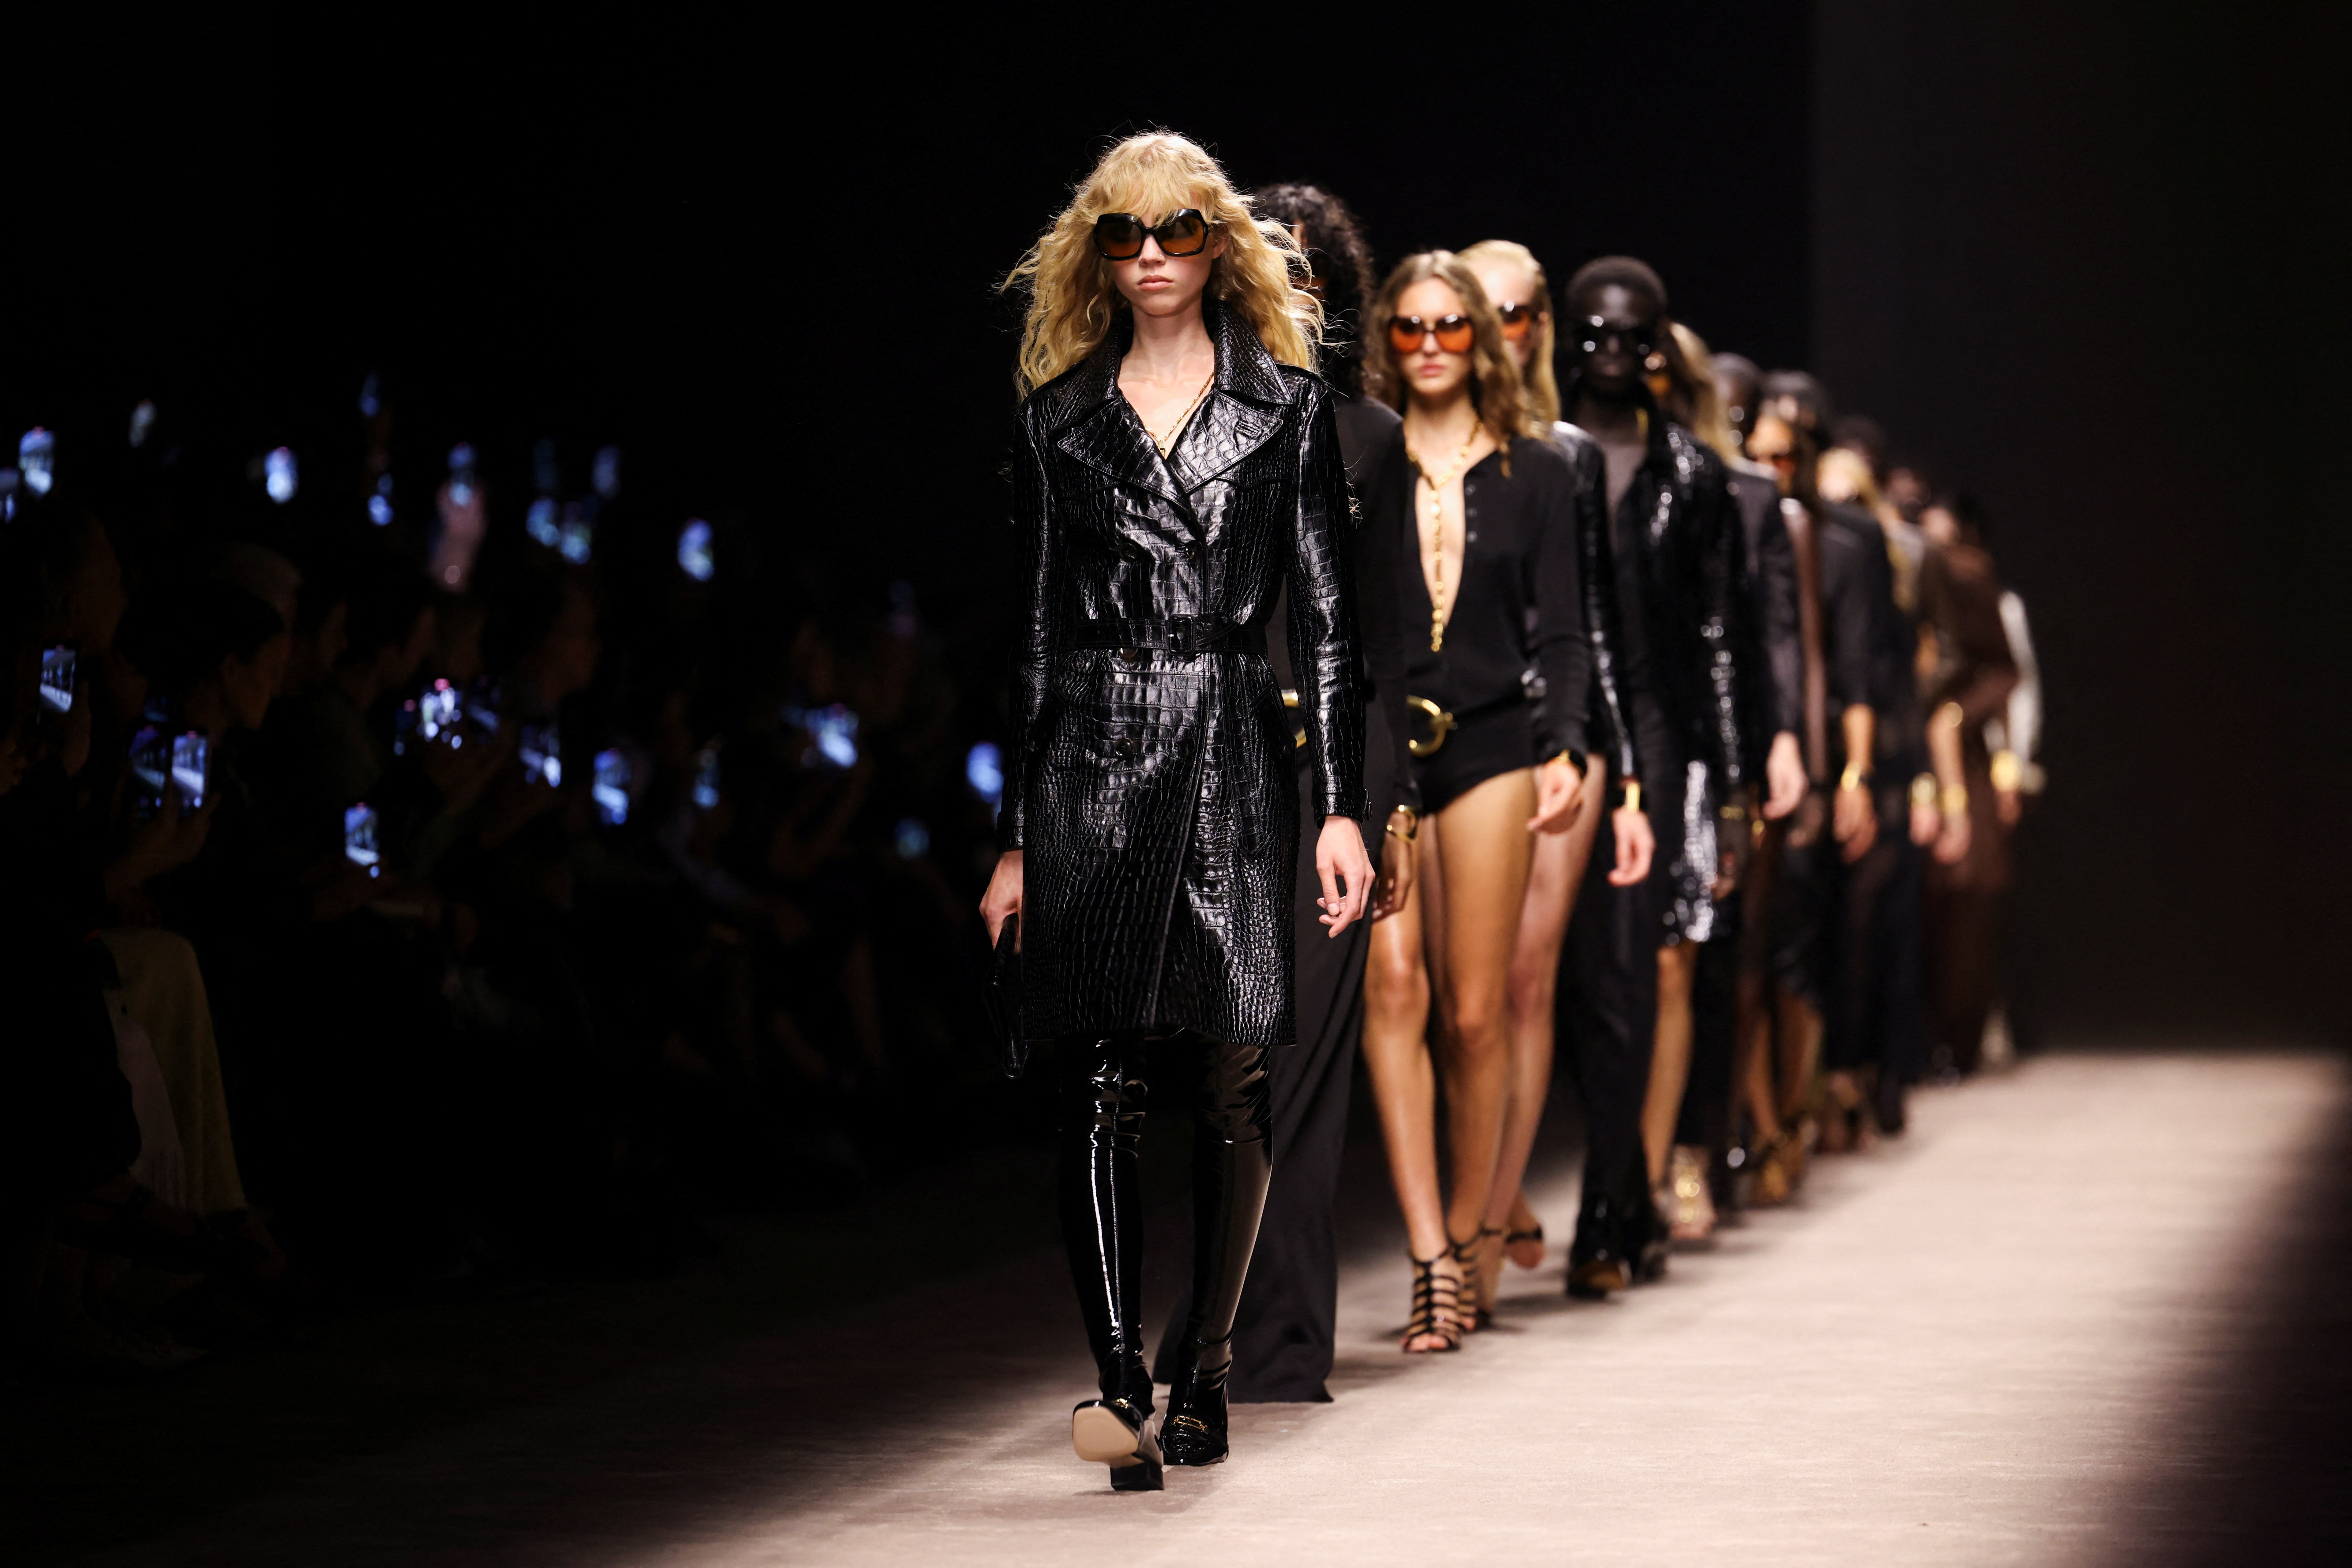 Peter Hawkings offers slinky designs in Tom Ford debut at Milan Fashion | Reuters